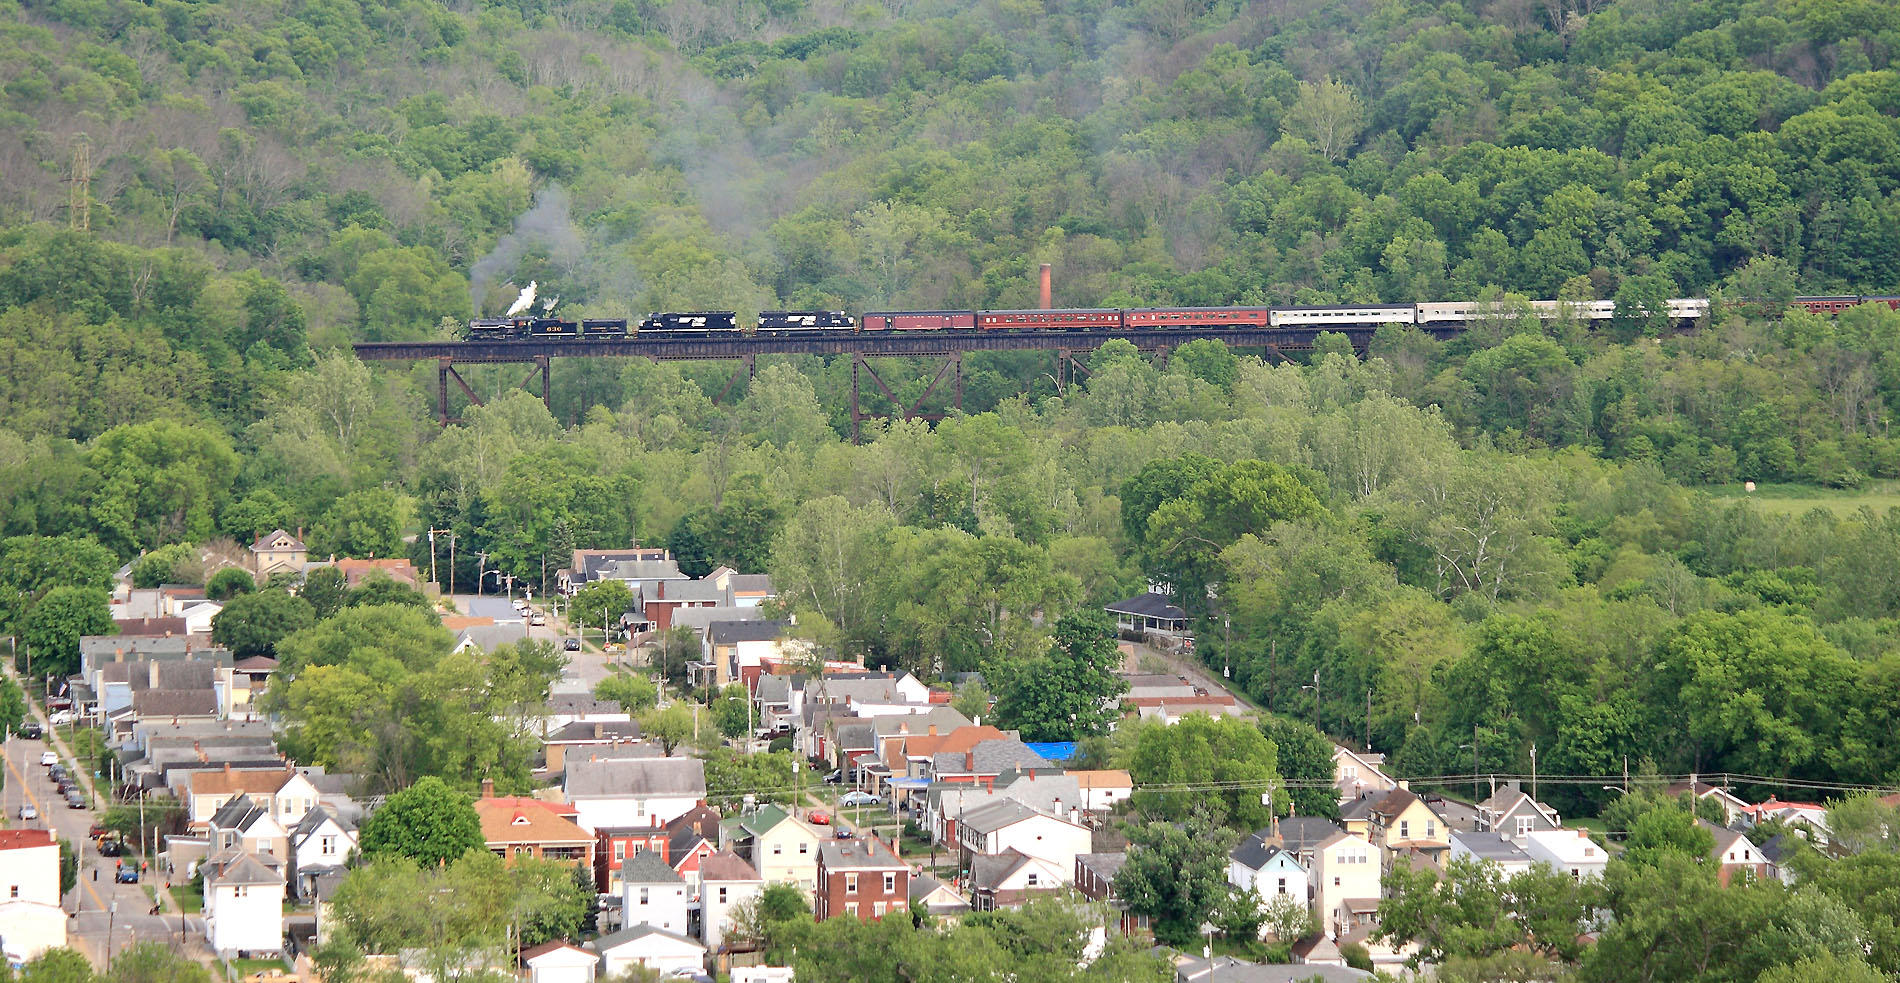 Southern 630 soars high above Ludlow KY as the train returns North after a trip to Danville 